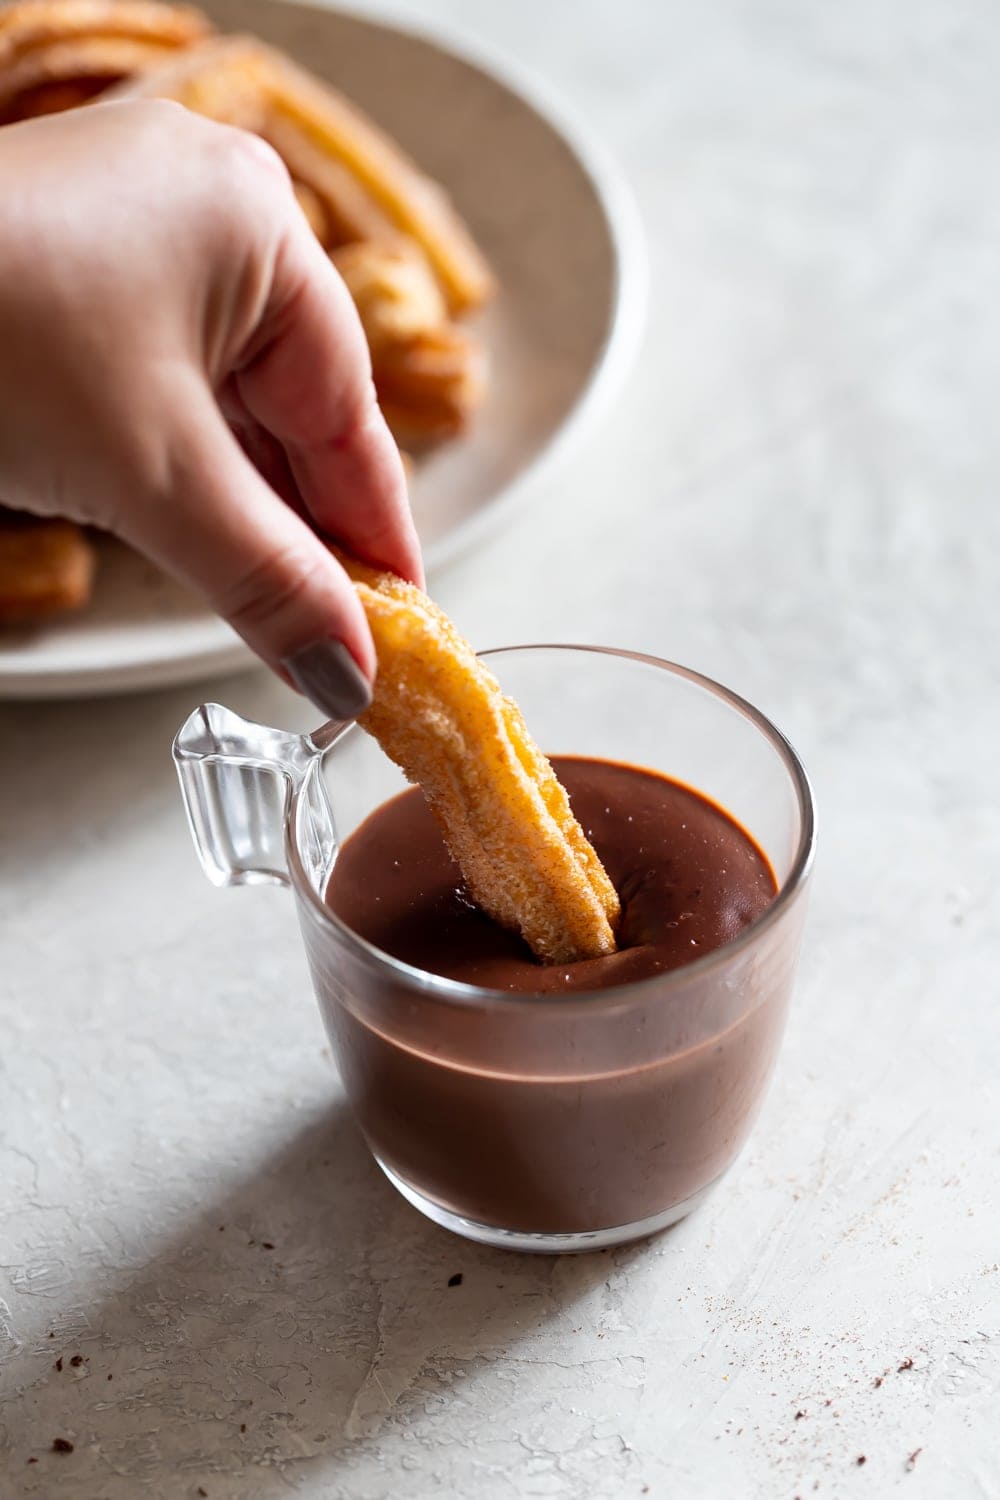 photo of a churro being dipped into thick, hot chocolate